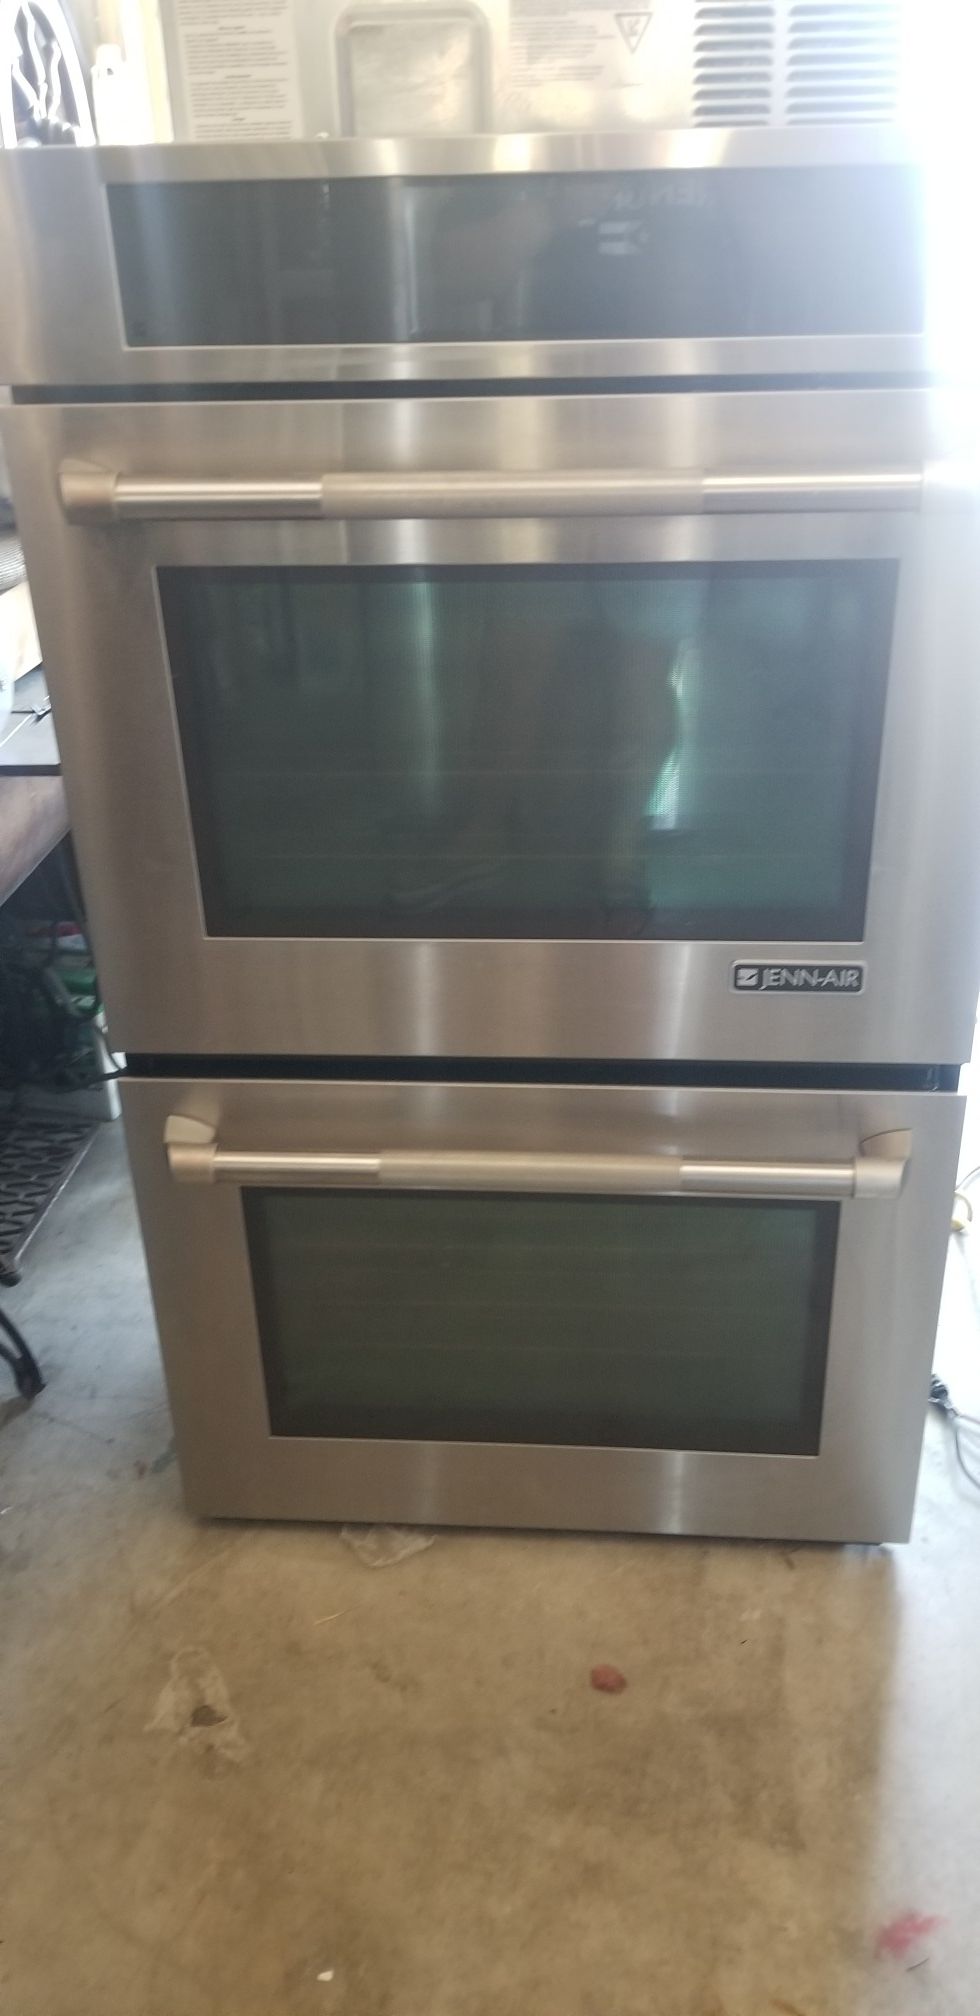 Jenn Air stainless steel double wall oven and microwave drawer